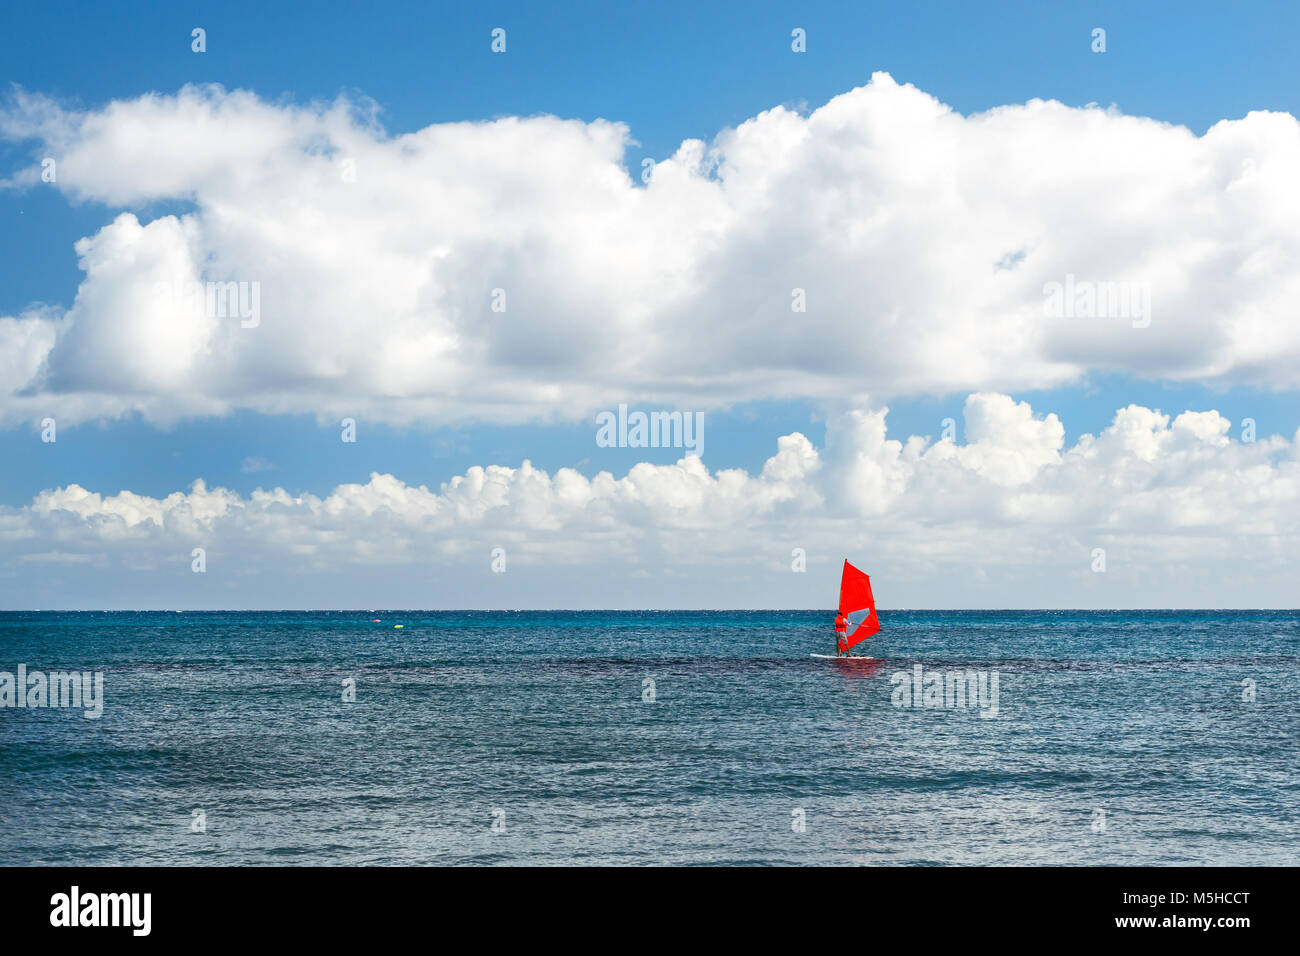 Windsurf with red sail rides on sea. View from sunny Livadi beach in resort village Bali. Rethymno, Crete Greece. Extreme water sports as active recre Stock Photo